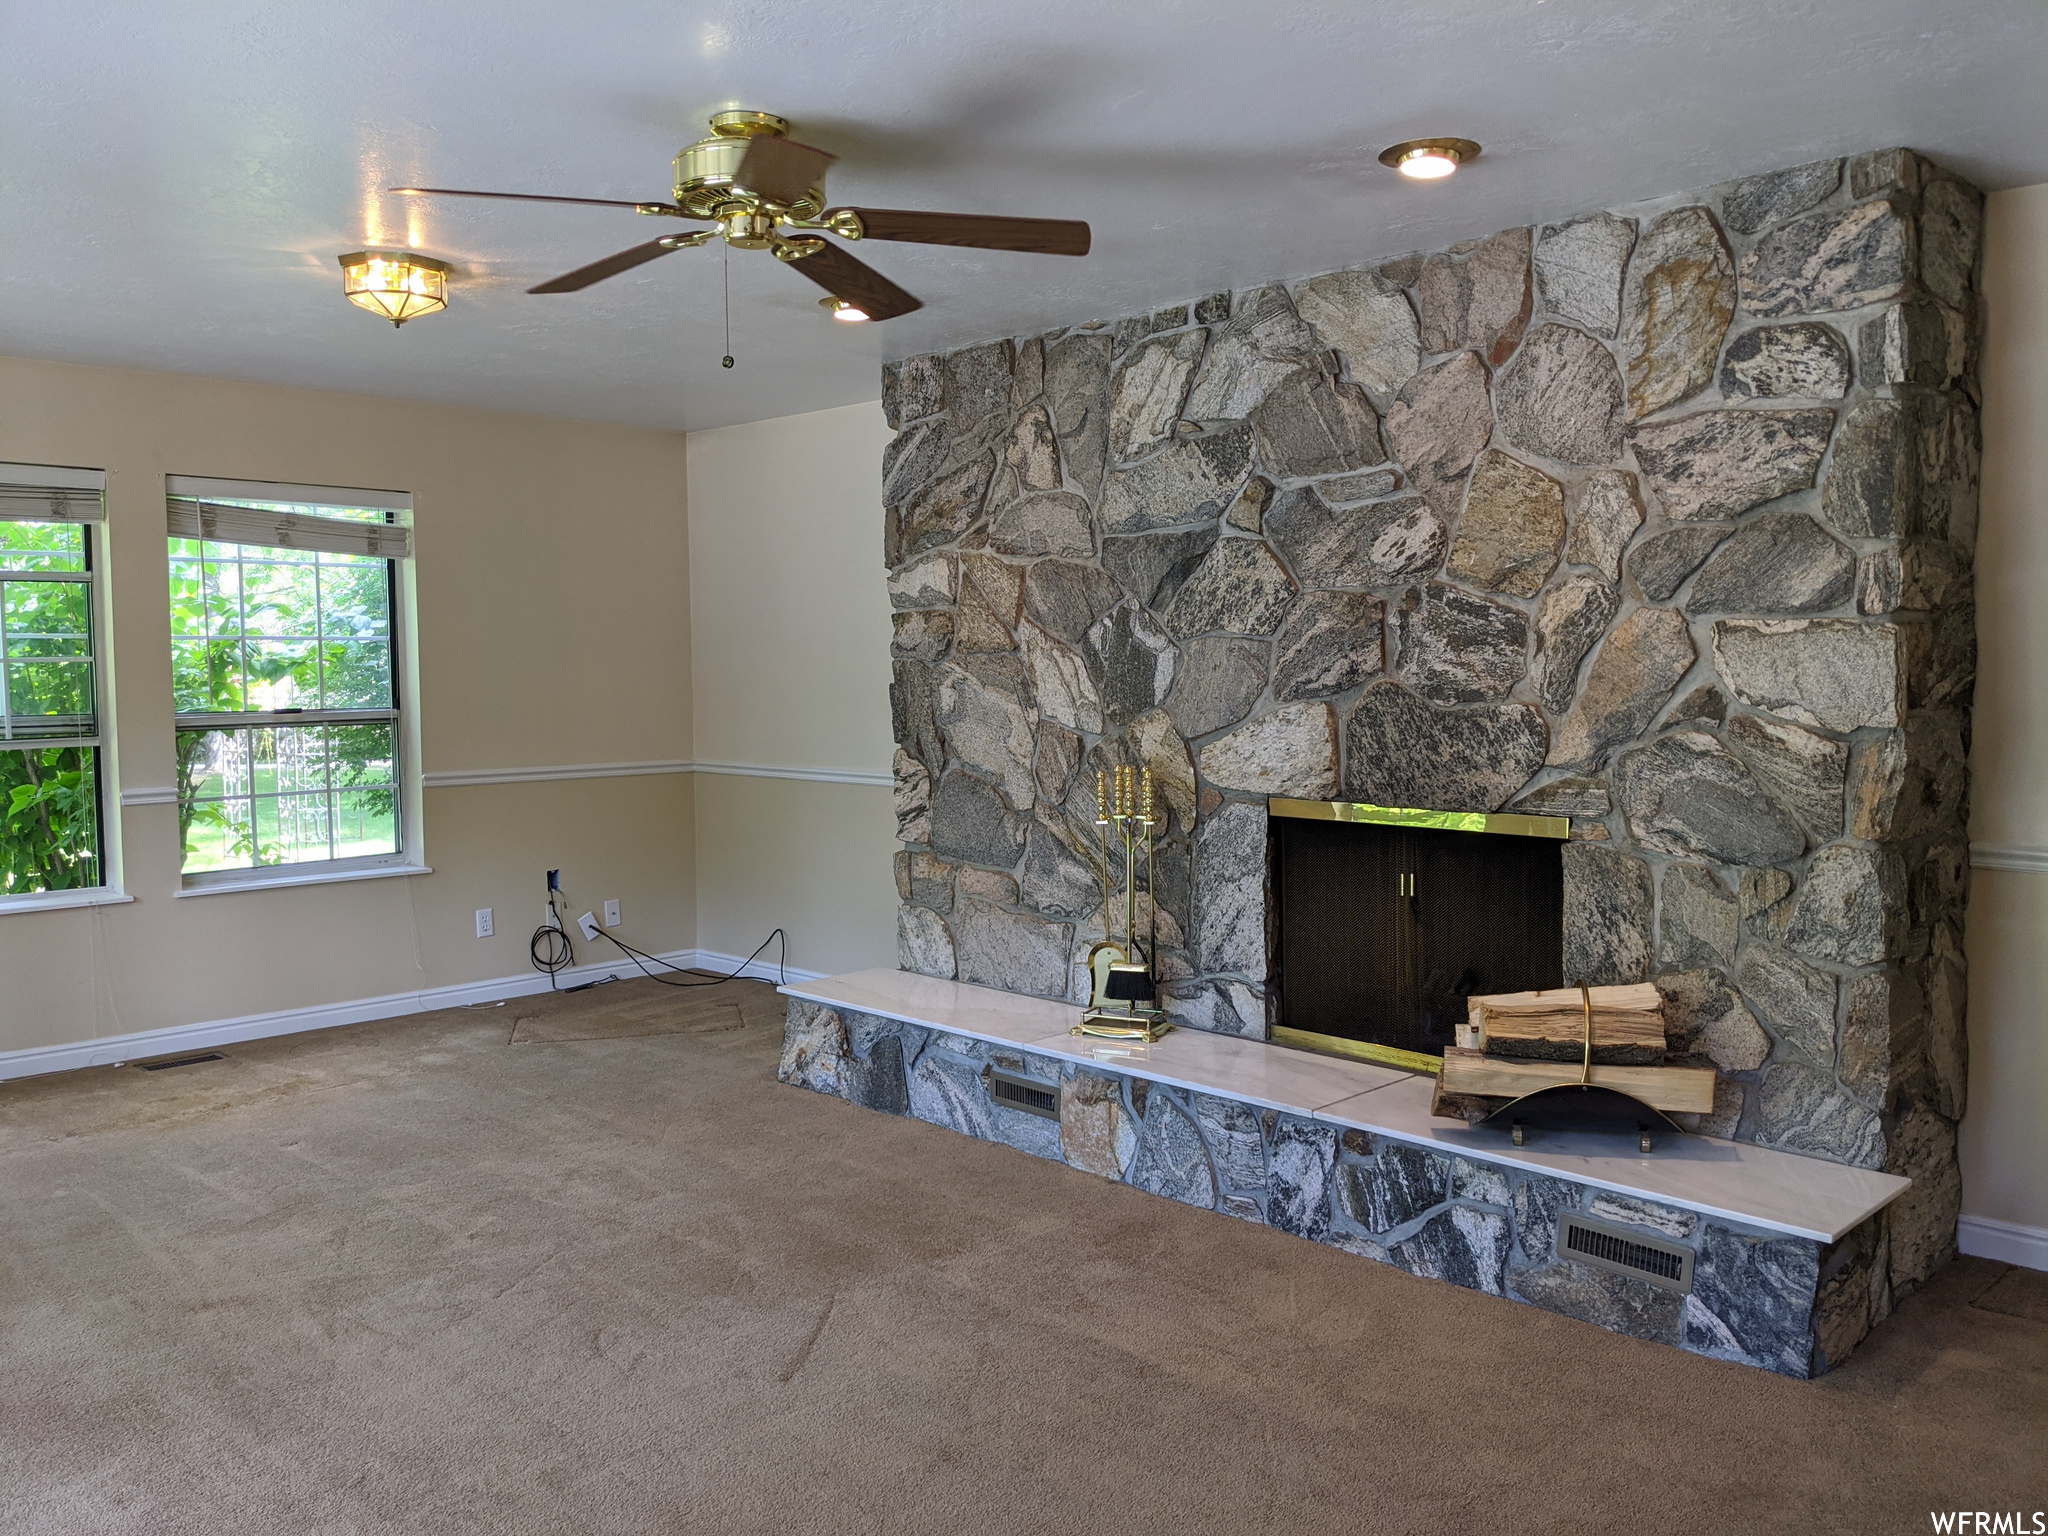 Carpeted living room with ceiling fan and a fireplace